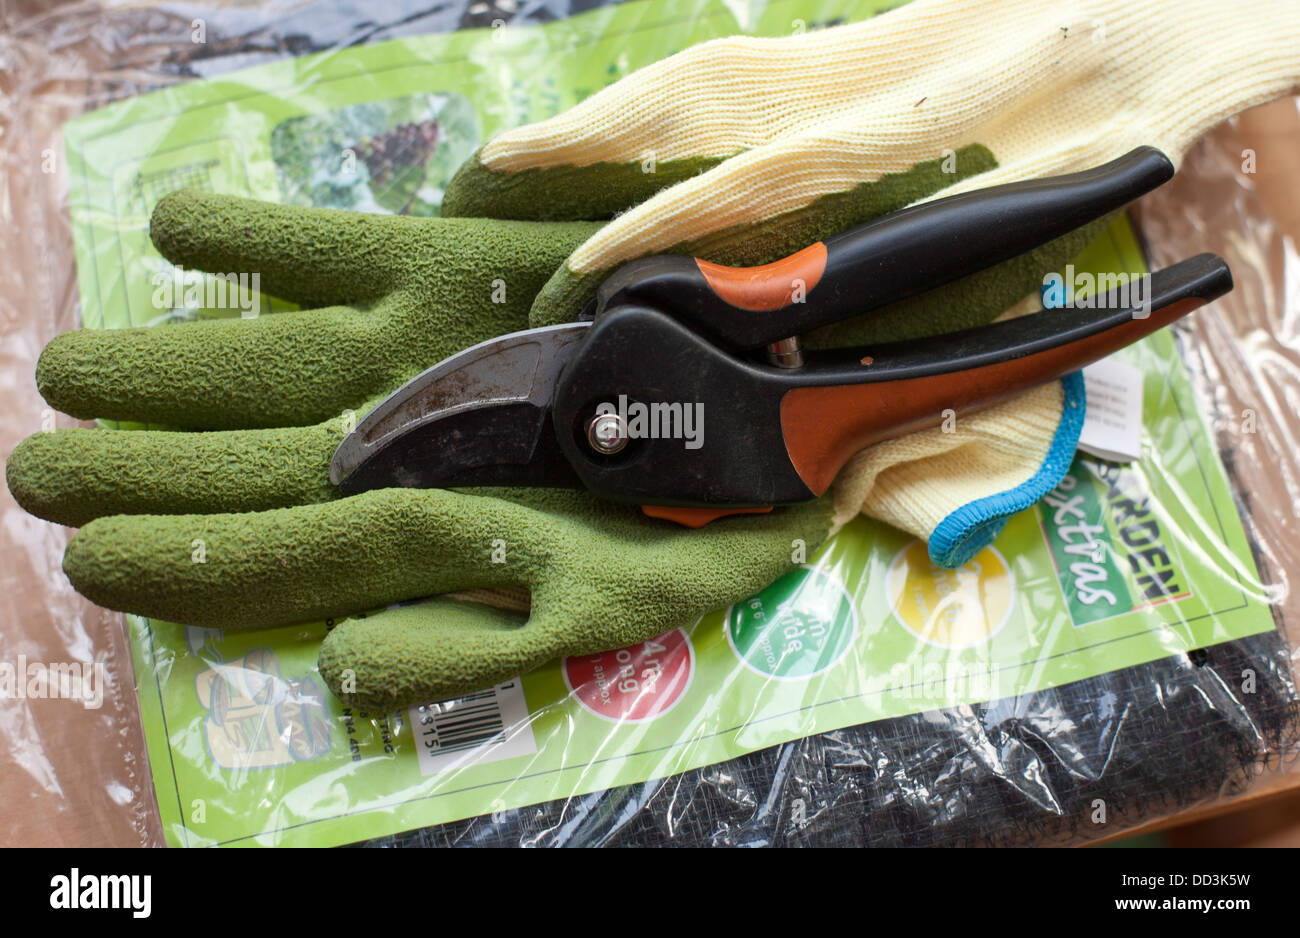 Gardening gloves and secateurs Stock Photo